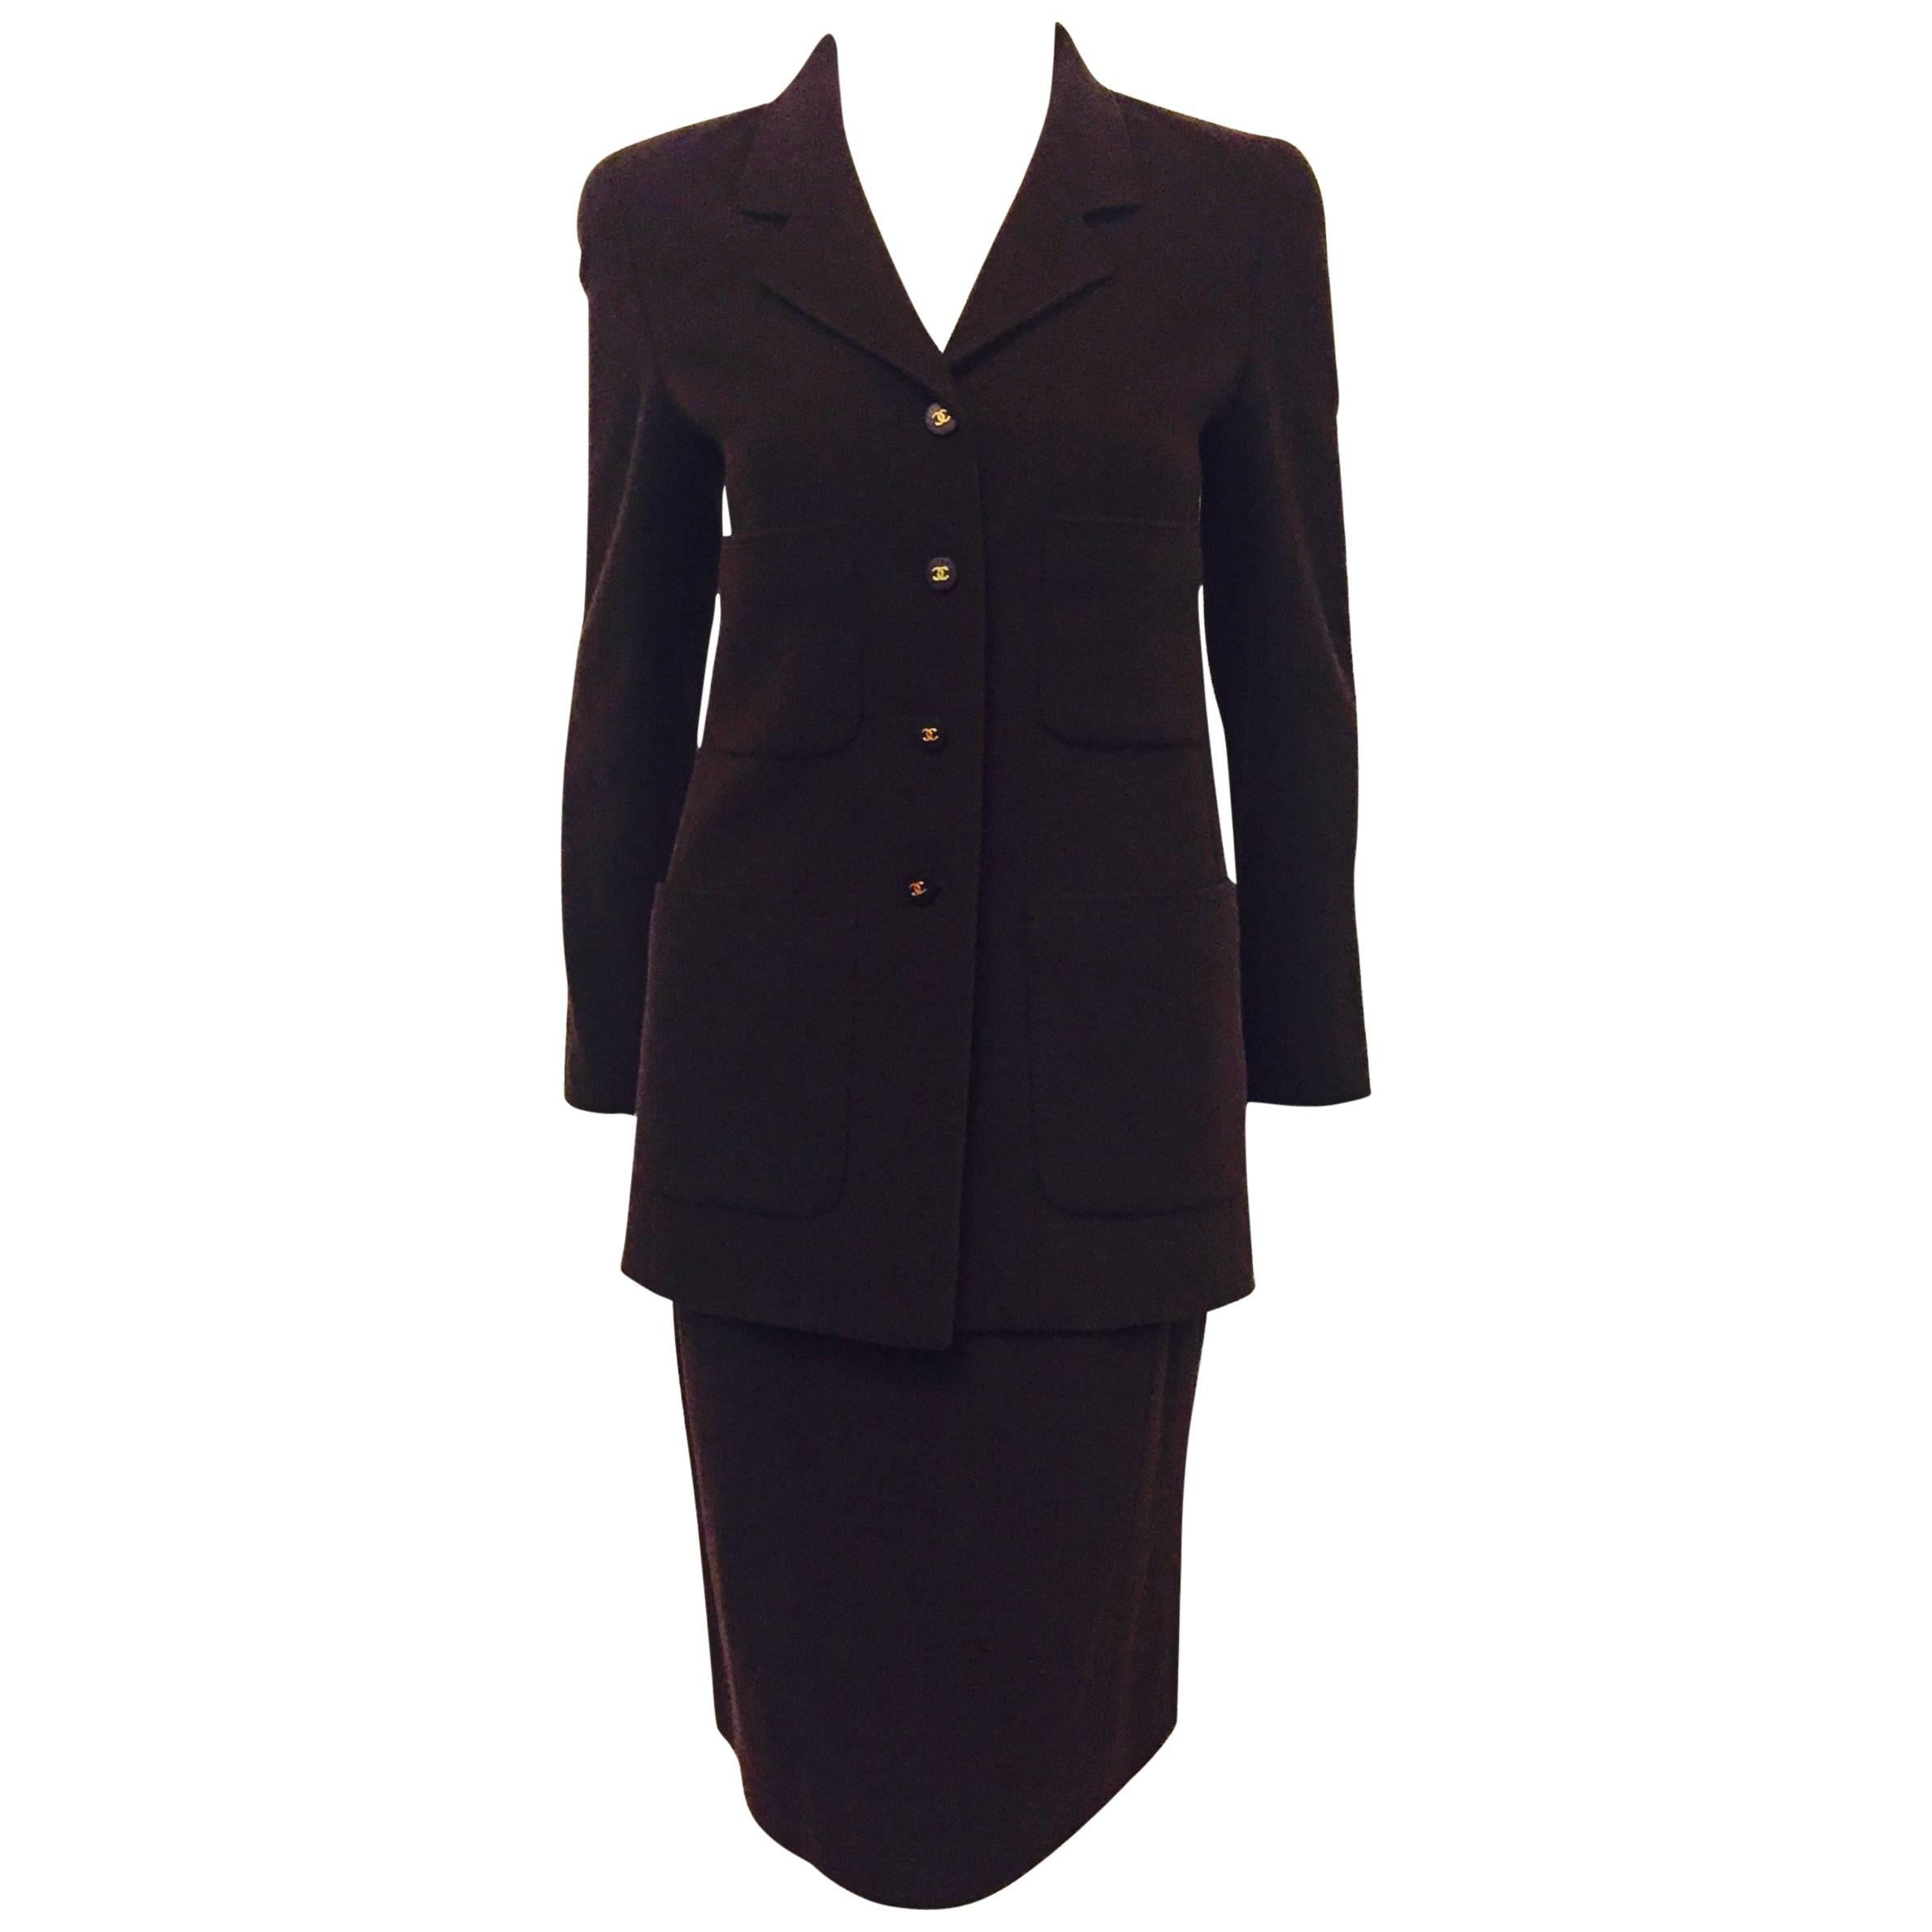 Chanel Boutique Chocolate Wool Blend Skirt Suit with Longer Length Jacket For Sale